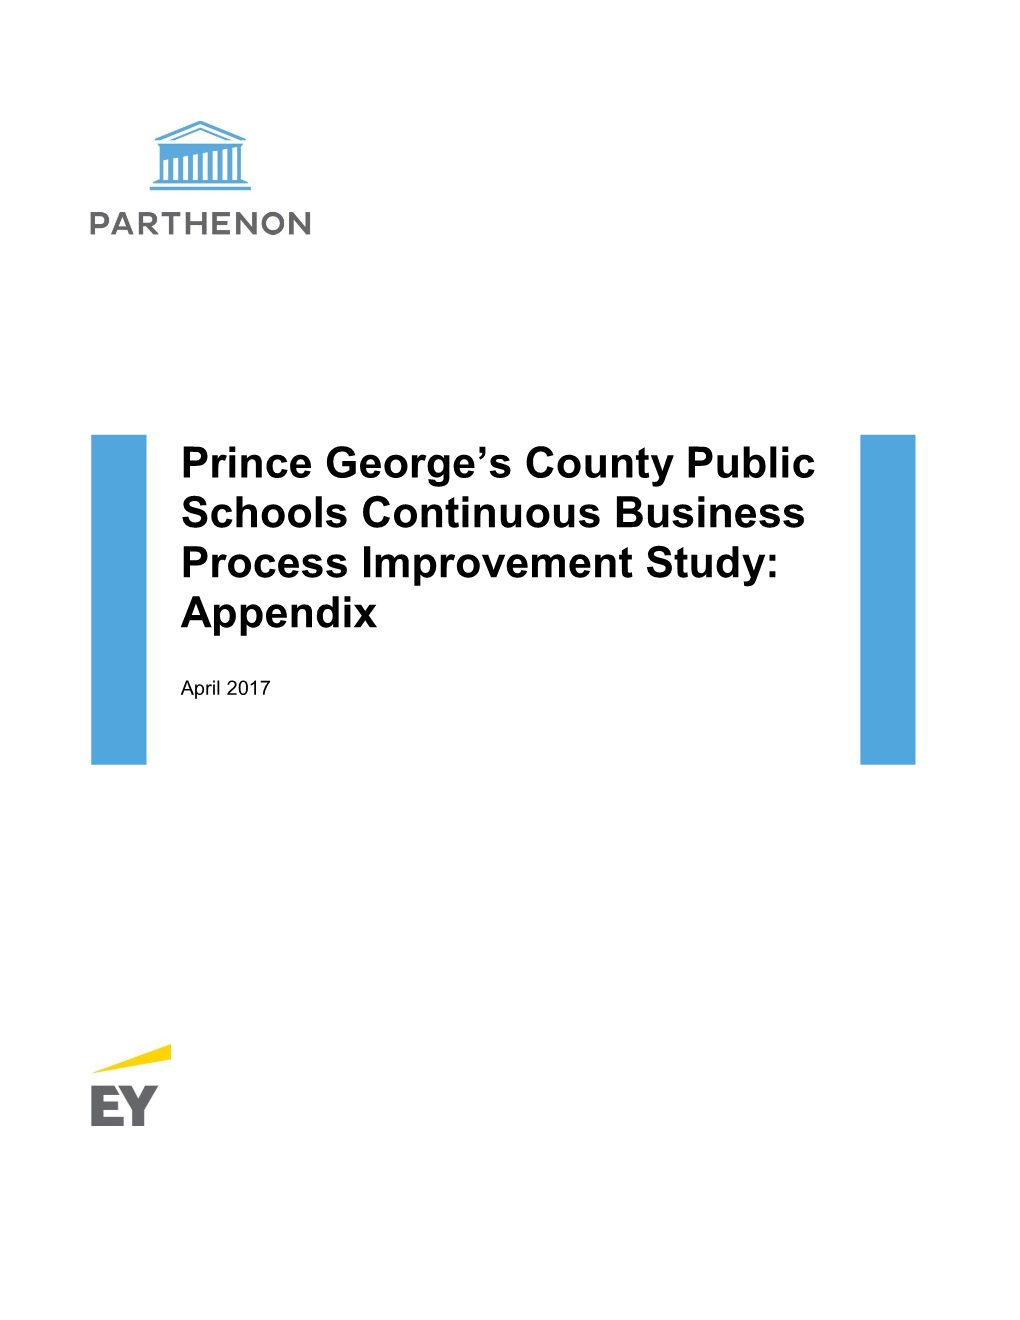 Prince George's County Public Schools Continuous Business